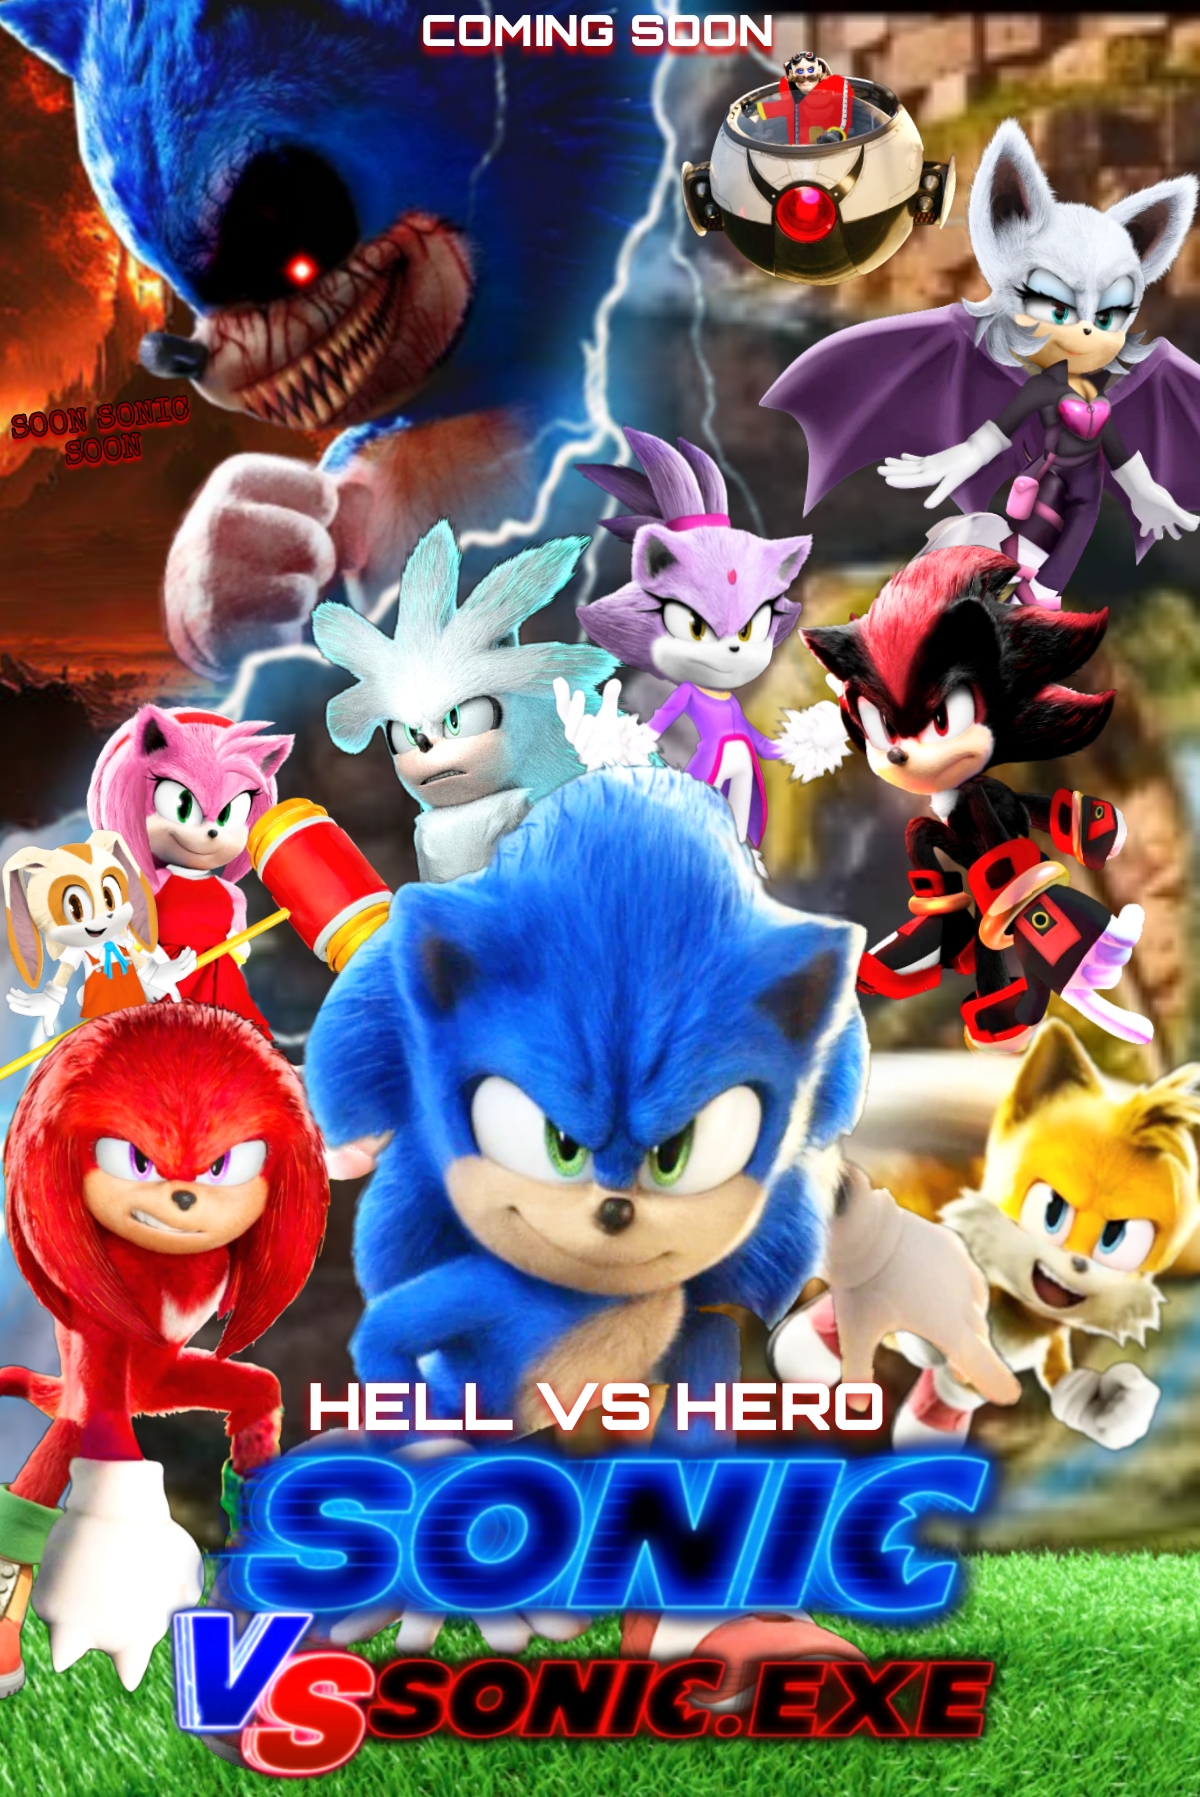 Sonic The Hedgehog Movie 4 fanmade poster by Nikisawesom on DeviantArt